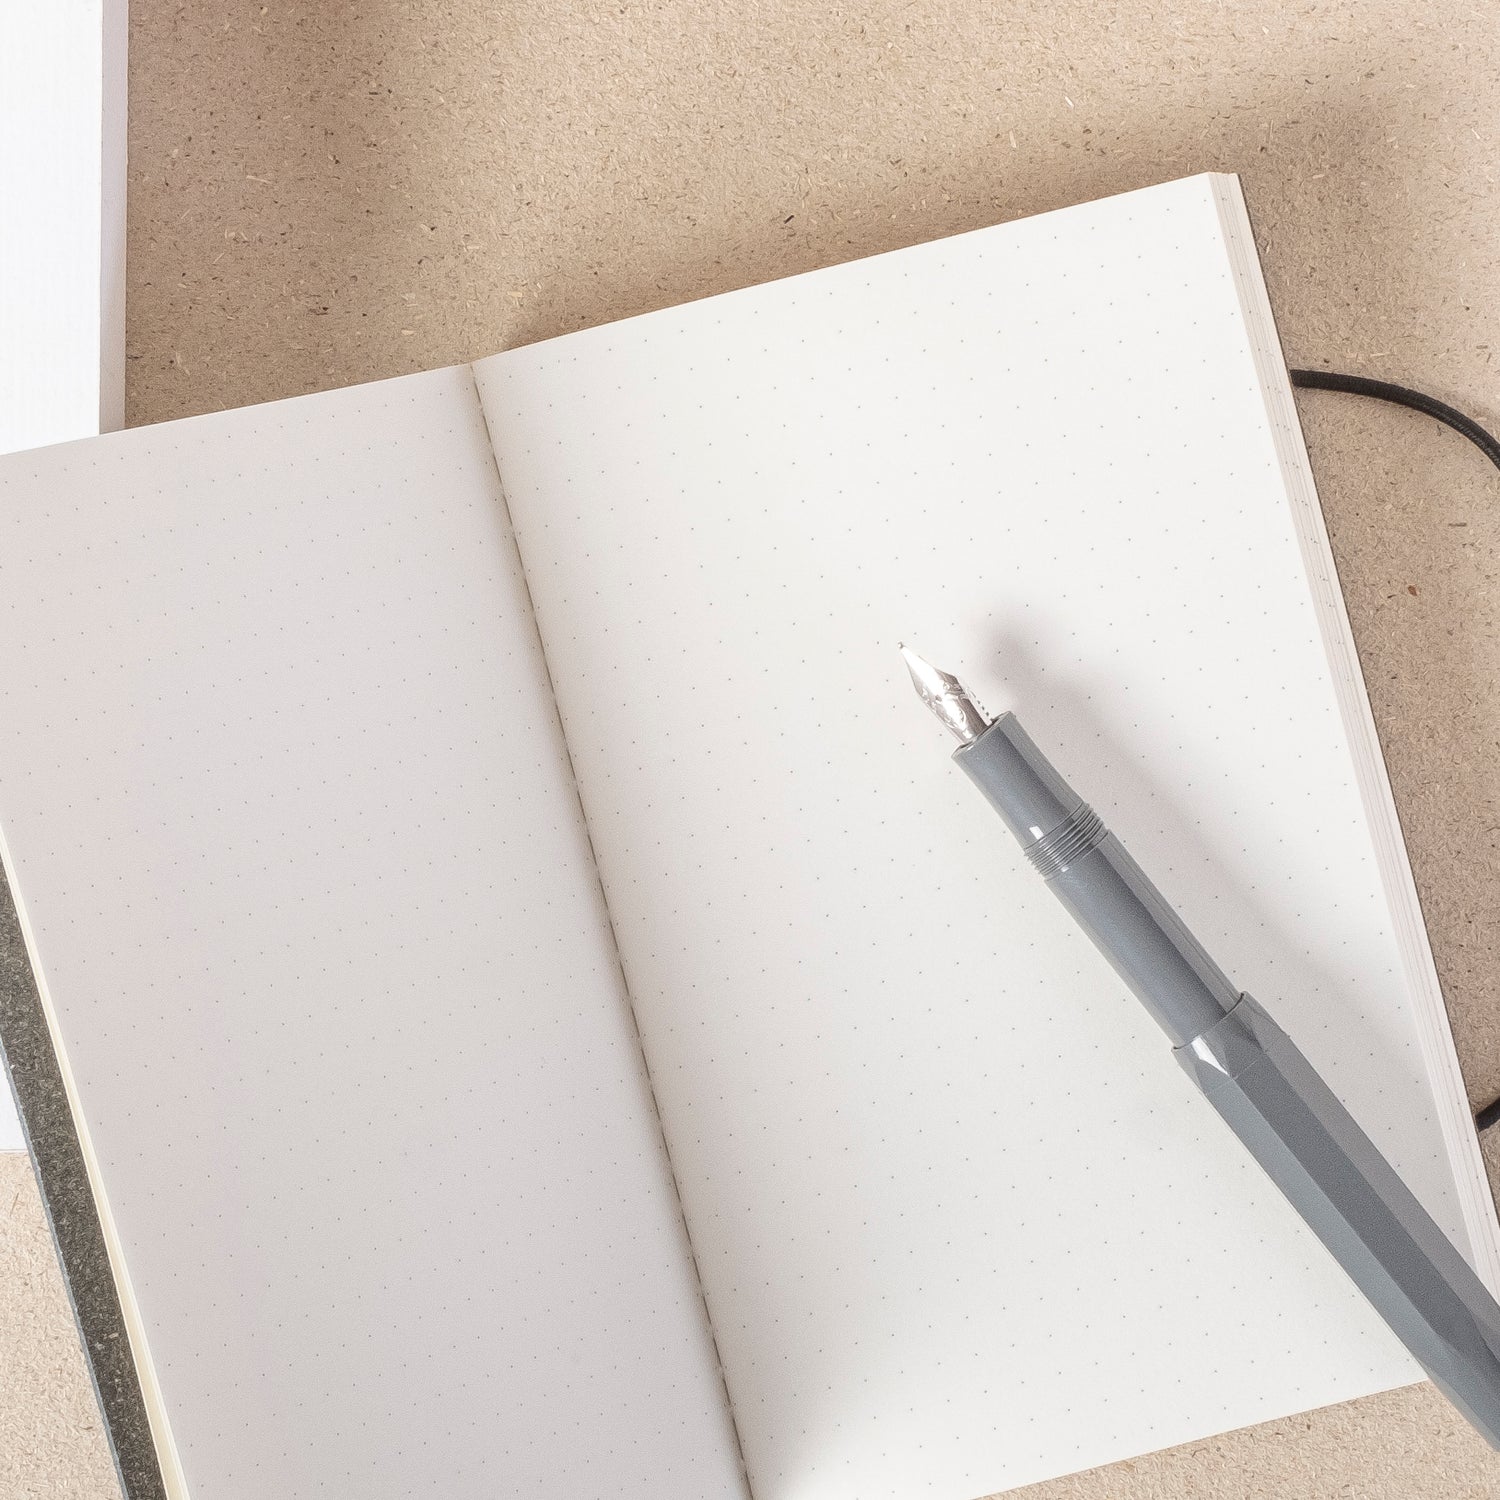 Nitmoi Cahier Notebook - sustainable Notebook made from bonded leather